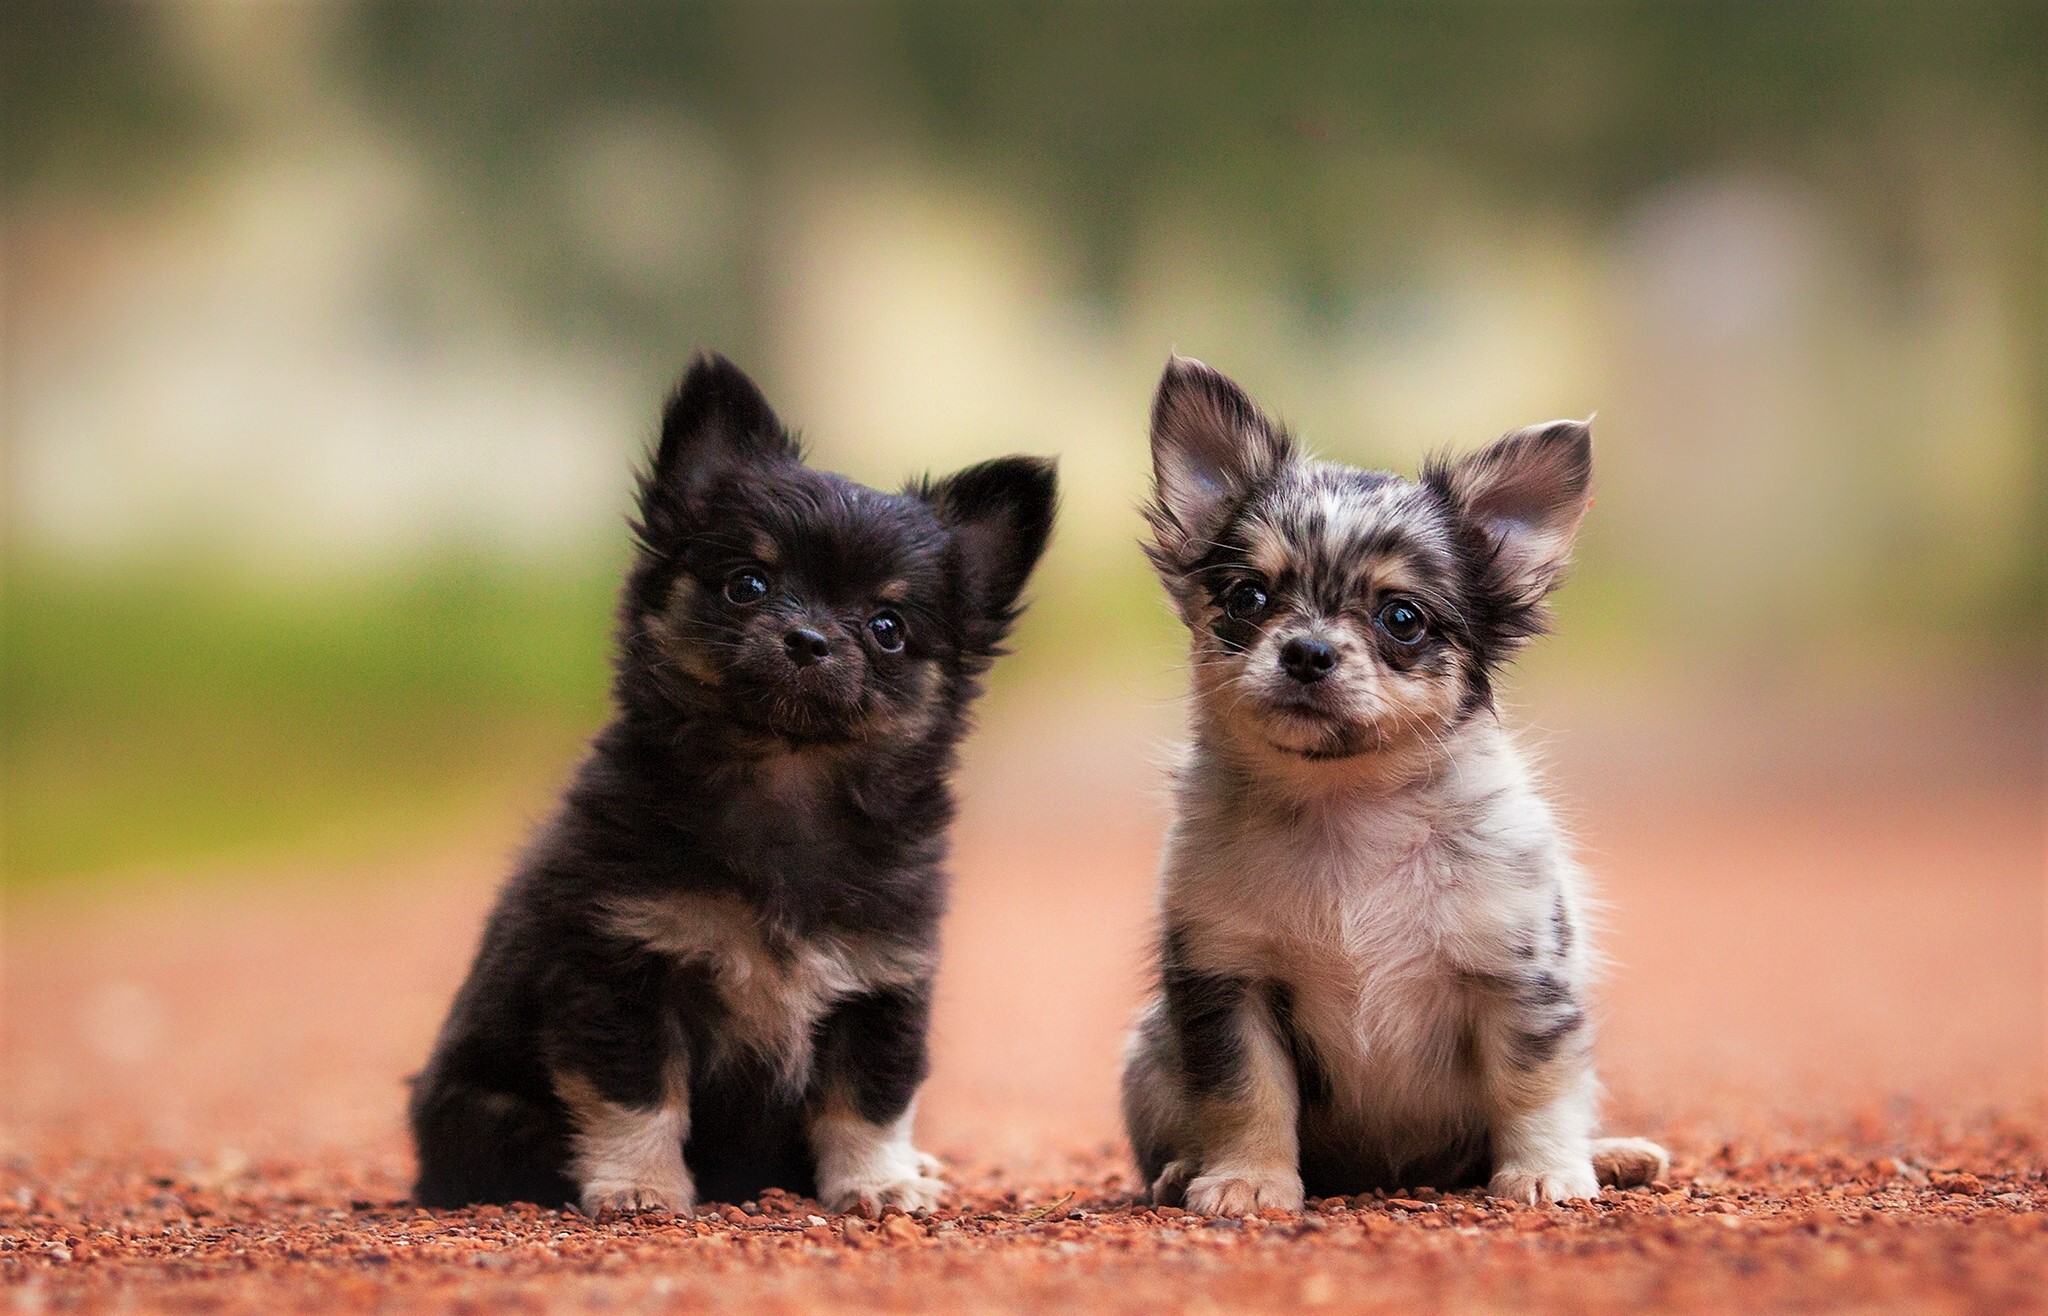 cute, animal, chihuahua, baby animal, dog, puppy, dogs